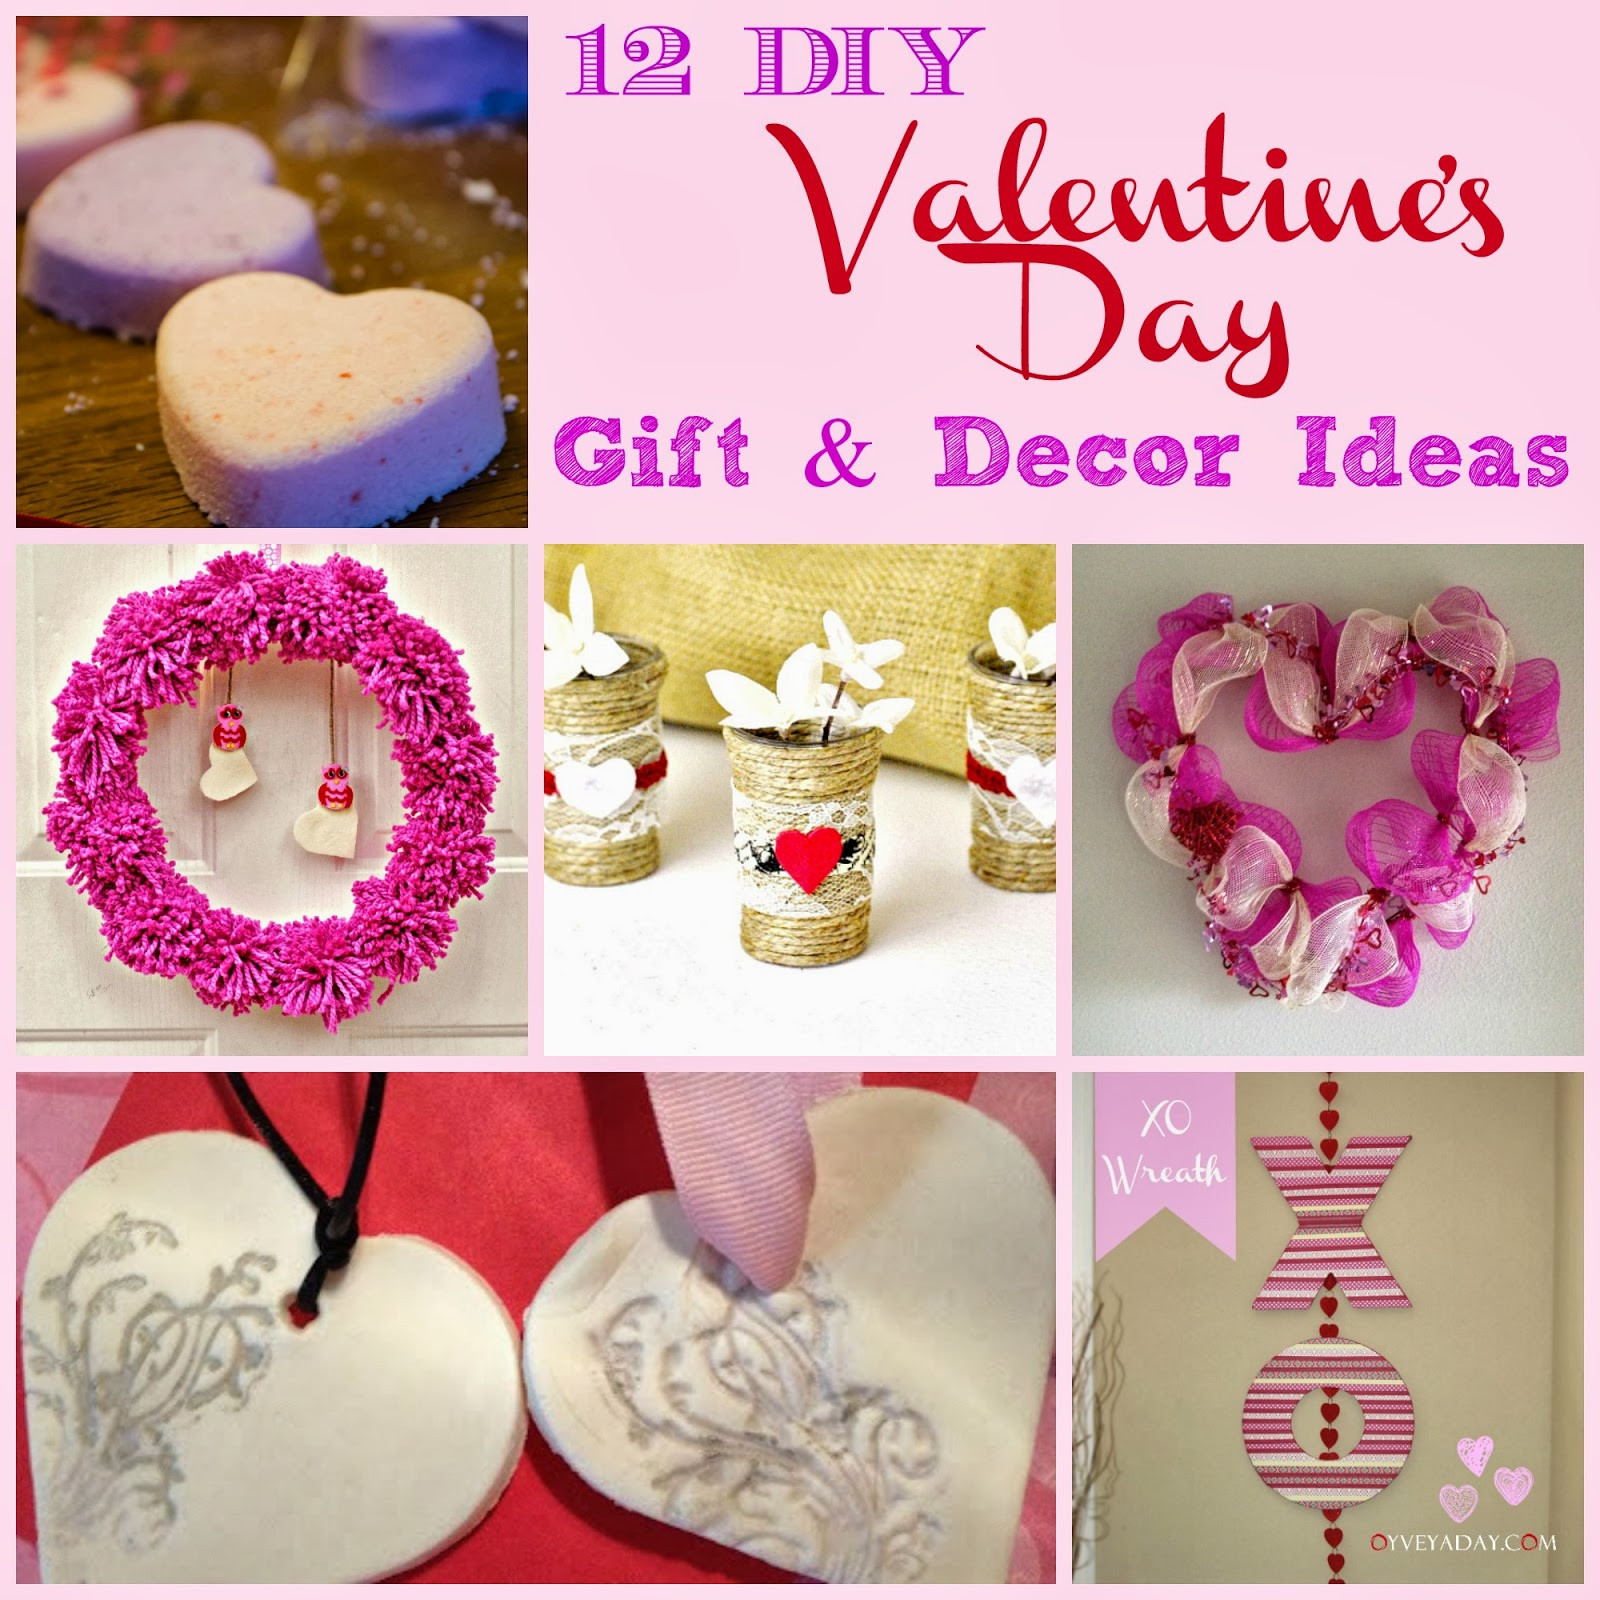 Valentine'S Day Homemade Gift Ideas
 12 DIY Valentine s Day Gift & Decor Ideas Outnumbered 3 to 1